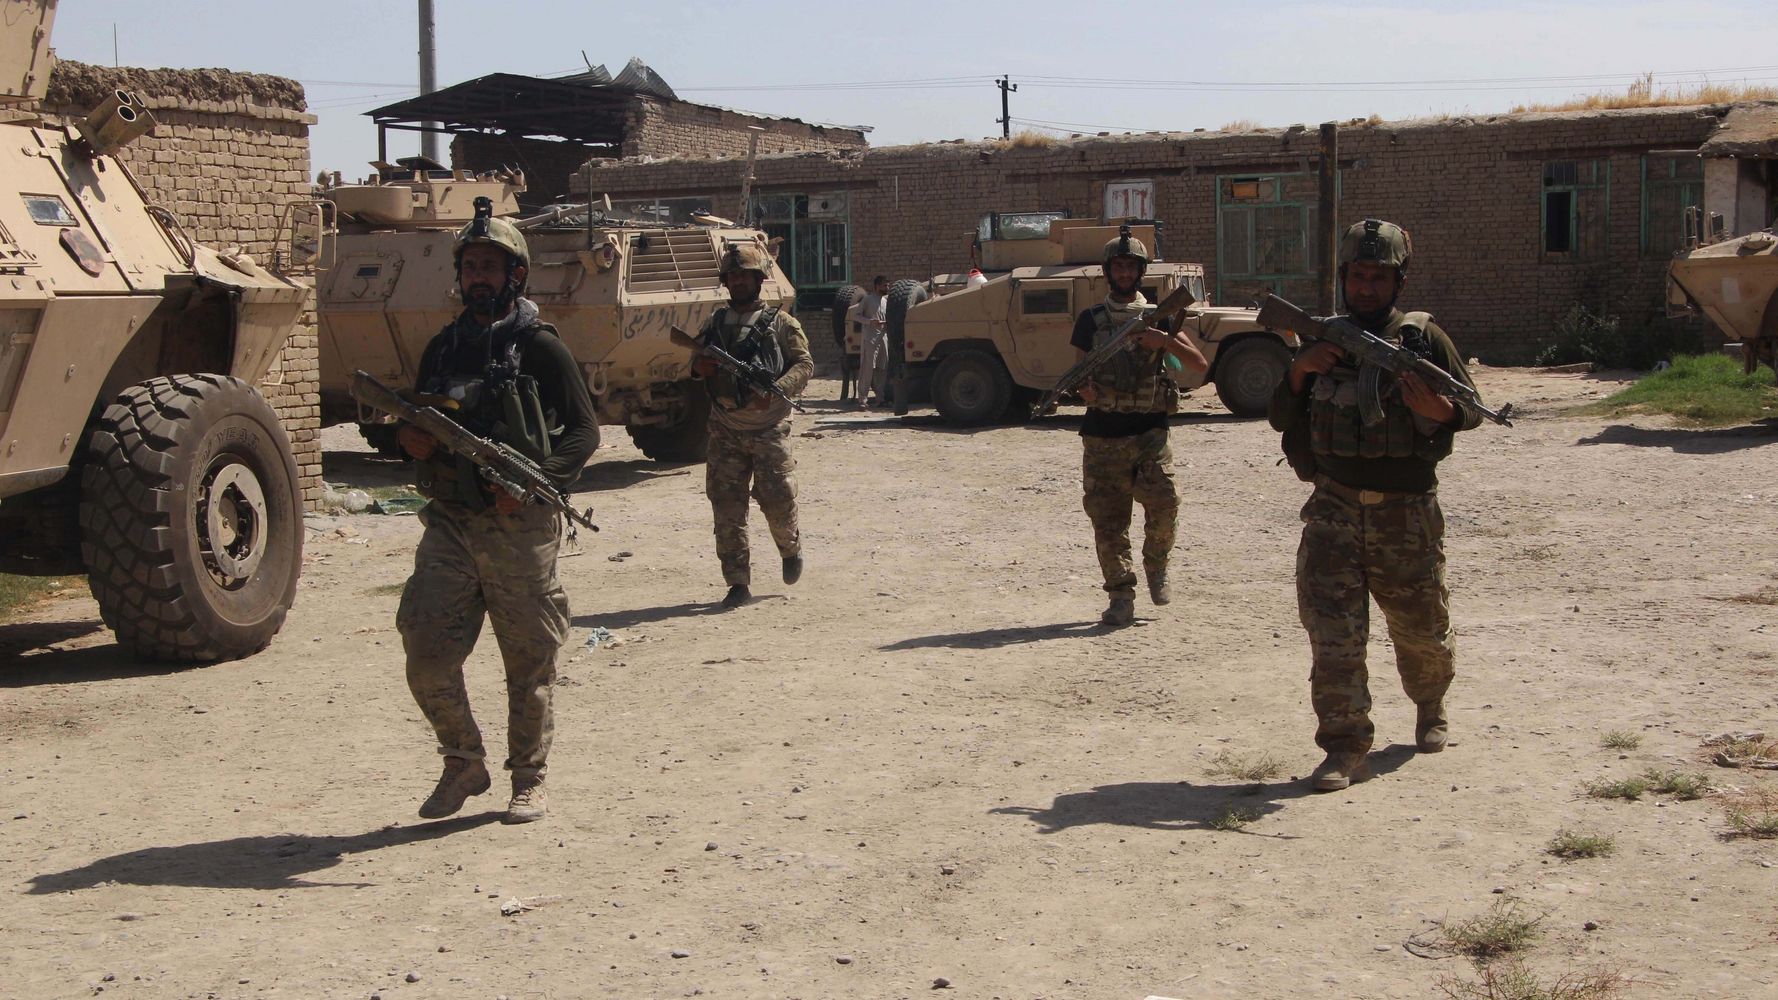 Taliban Seize Government Buildings In Kunduz, A Major Afghan City: Official